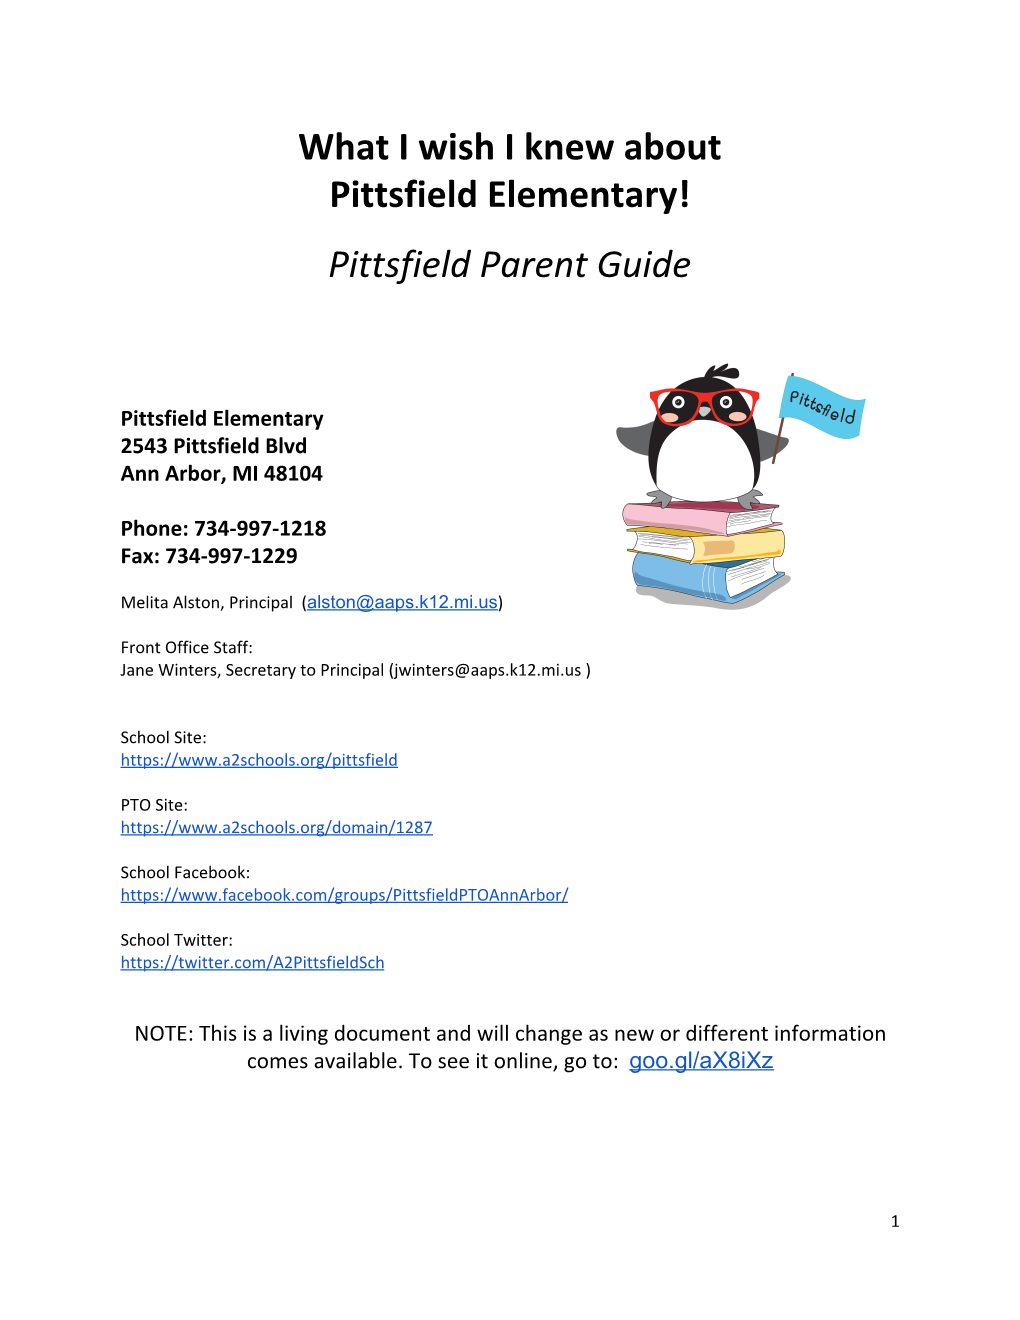 What I Wish I Knew About Pittsfield Elementary!